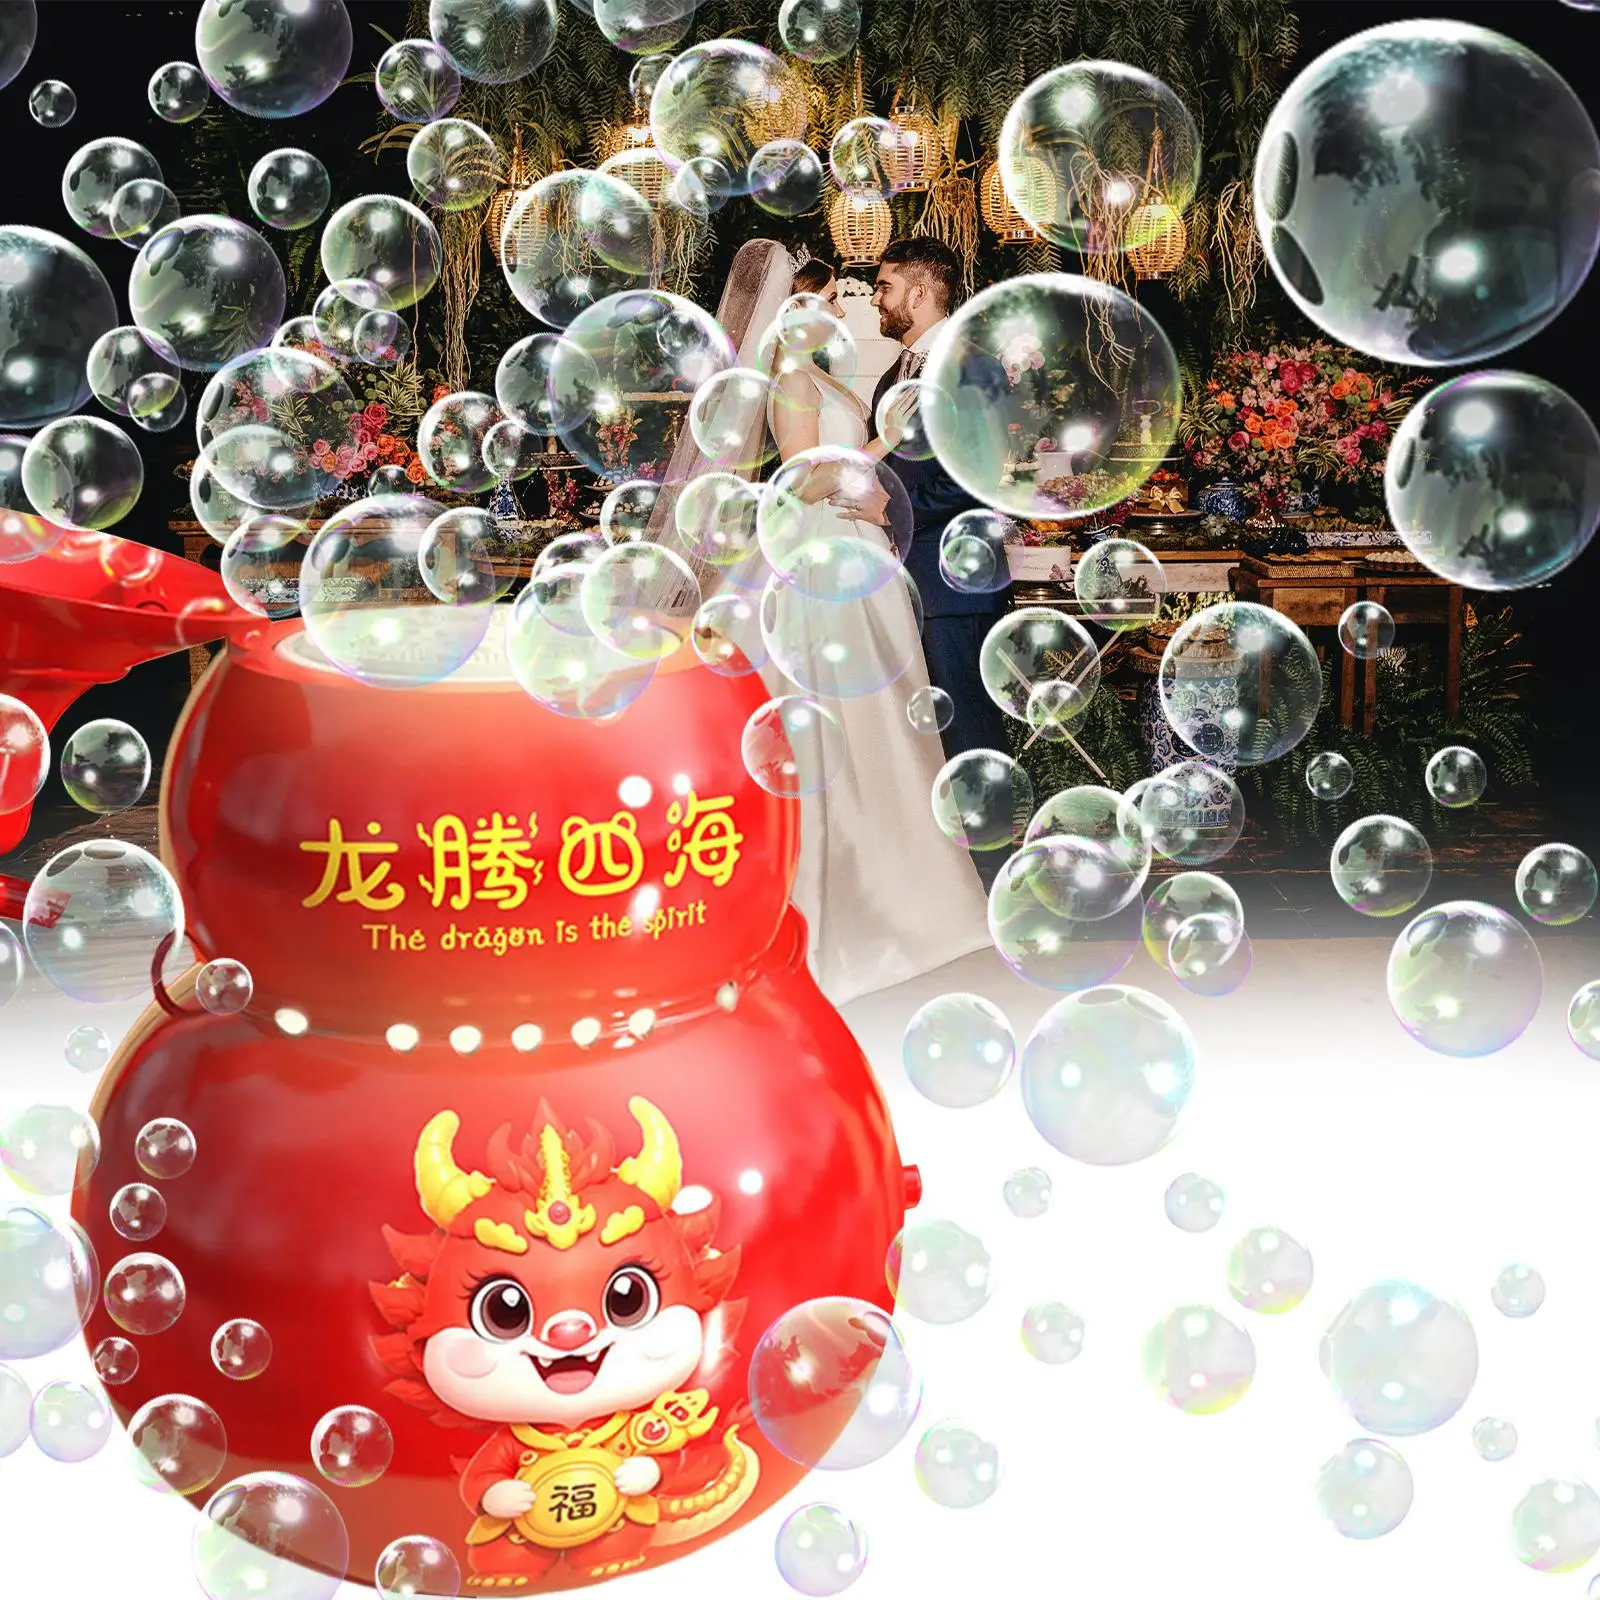 Chinese New Year with Sounds Beach Toy Portable Fireworks Bubble Machine for New Year Outdoor Activities Garden Indoor Celebrate